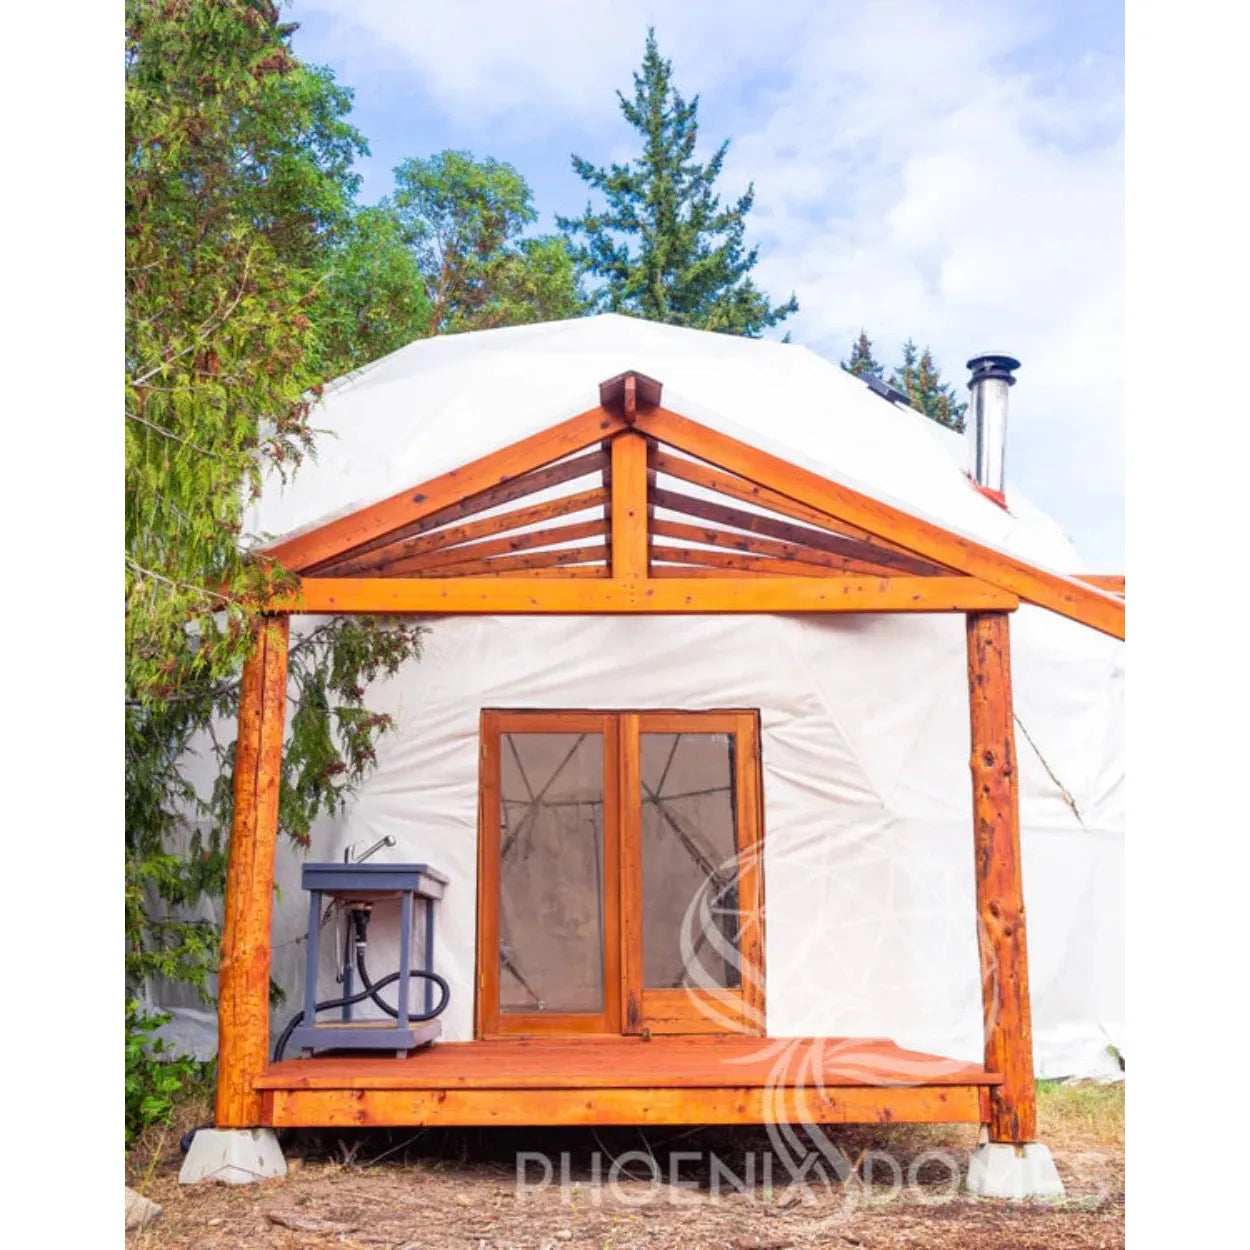 4-season-deluxe-glamping-yoga-package-dome-3310m-579